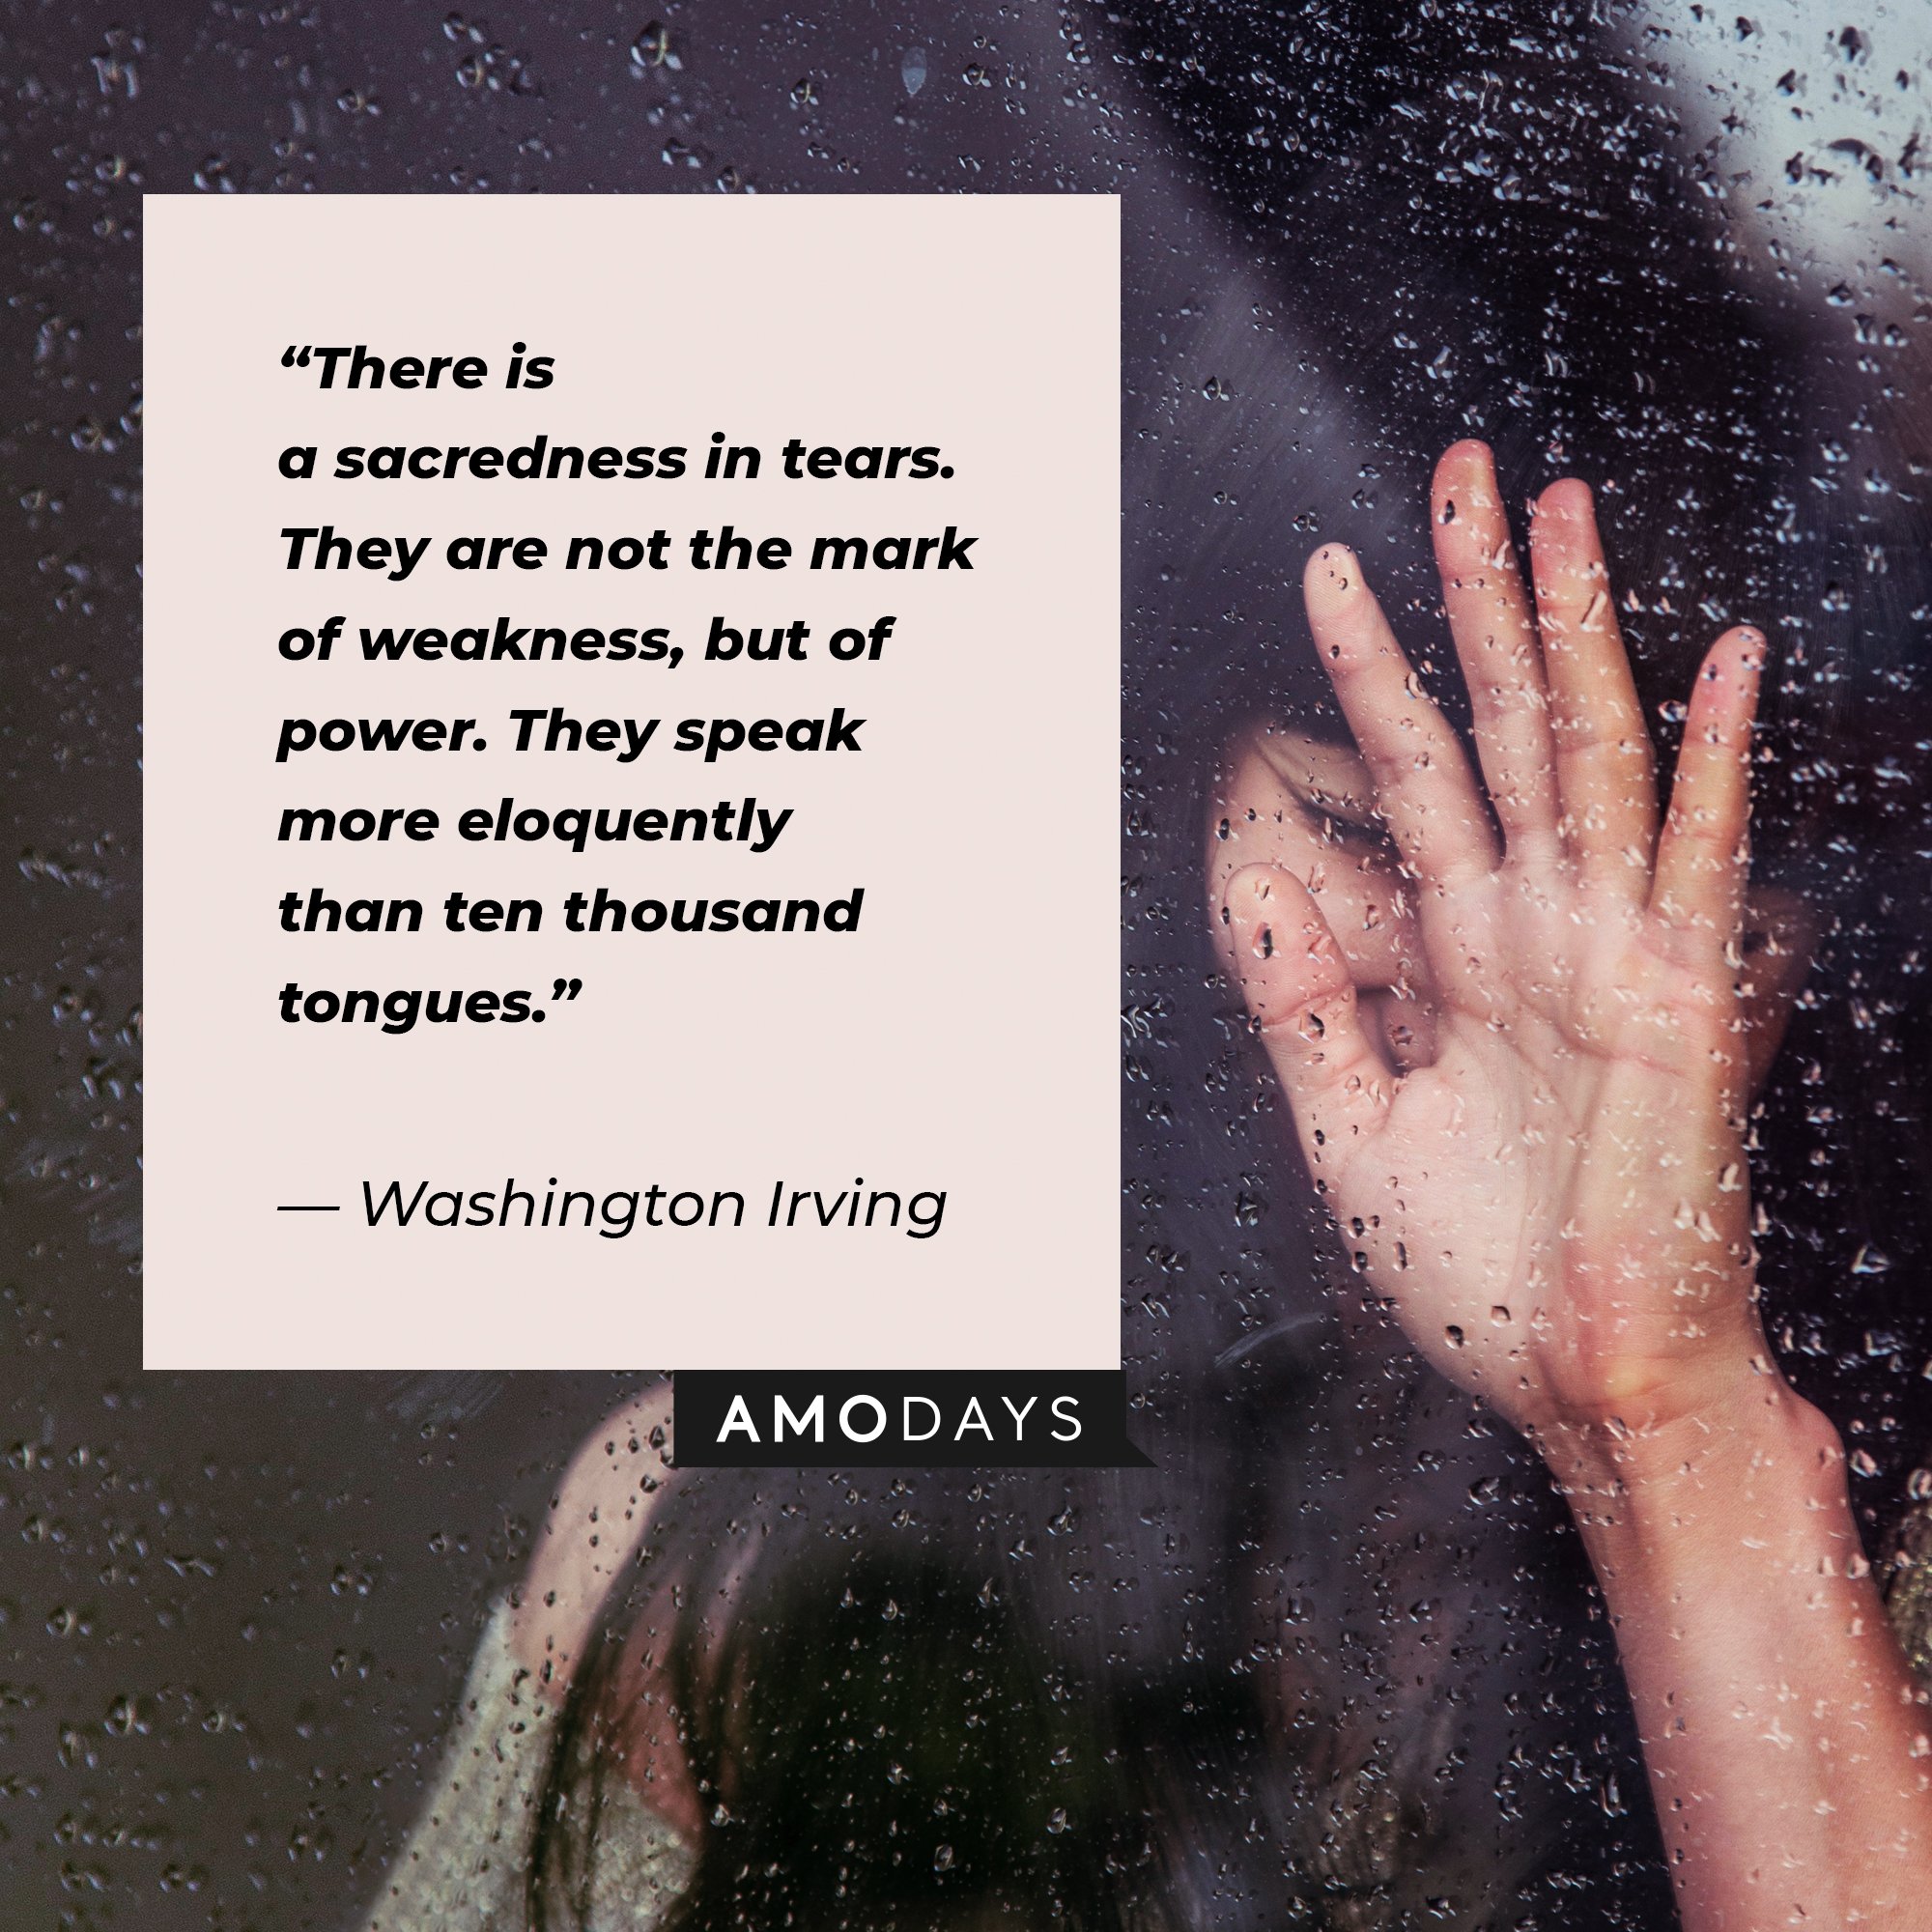 Washington Irving’s quote:“There is a sacredness in tears. They are not the mark of weakness, but of power. They speak more eloquently than ten thousand tongues.” | Image: AmoDays